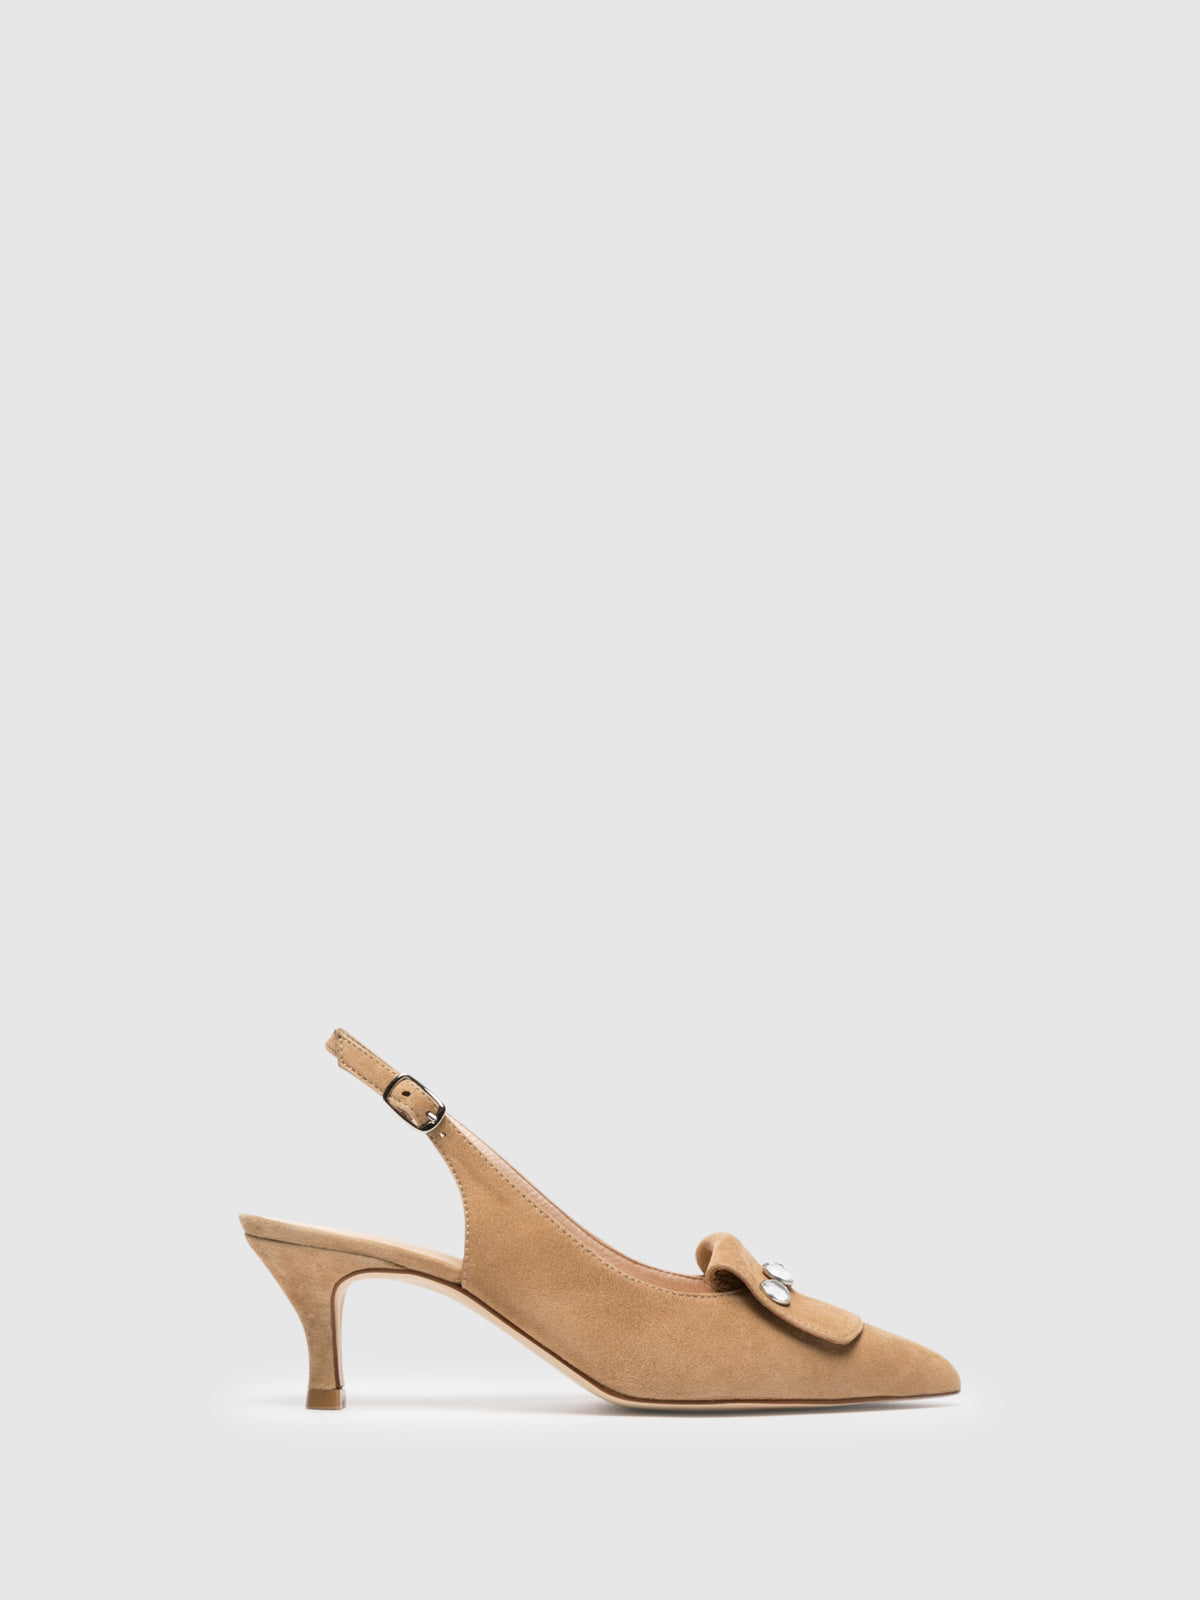 Sofia Costa Beige Ankle Strap Shoes